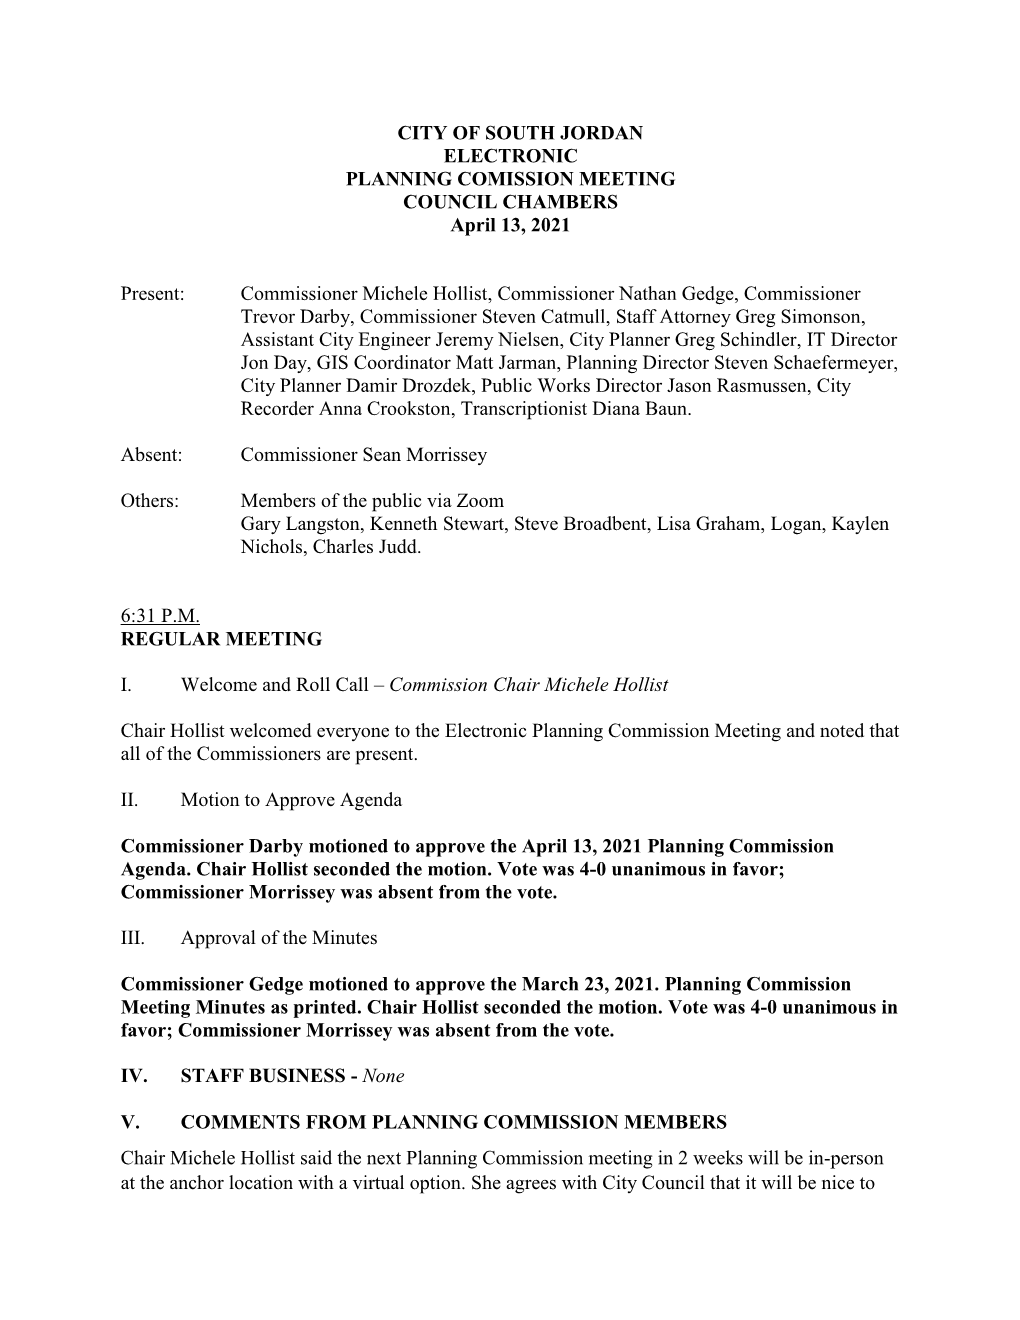 Planning Commission Minutes of 04-13-2021